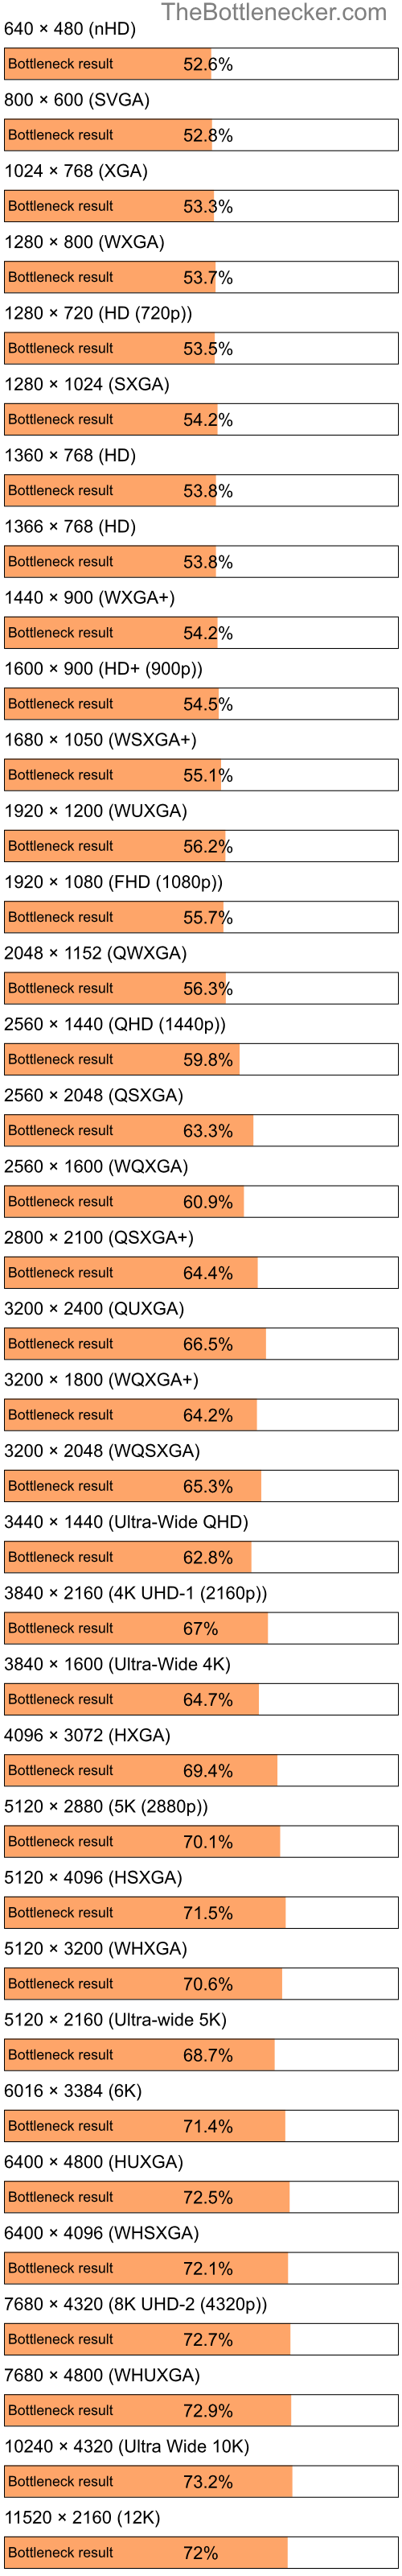 Bottleneck results by resolution for Intel Pentium 4 and NVIDIA GeForce 6610 XL in Processor Intense Tasks